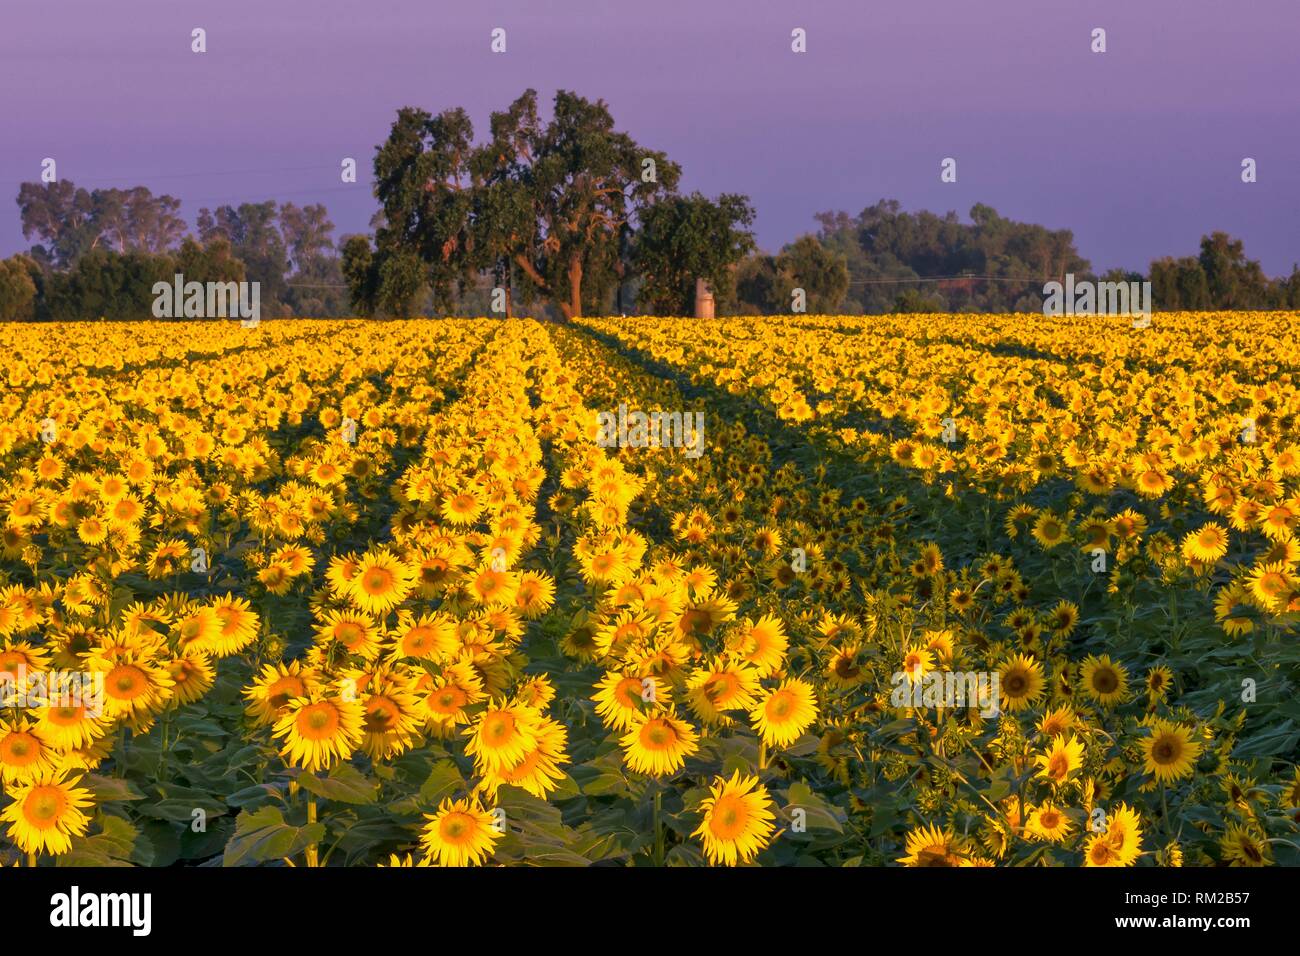 Sunflowers, like soldiers lined up for roll call, face towards the sunrise in the farmland of Yolo County, CA, USA. Stock Photo